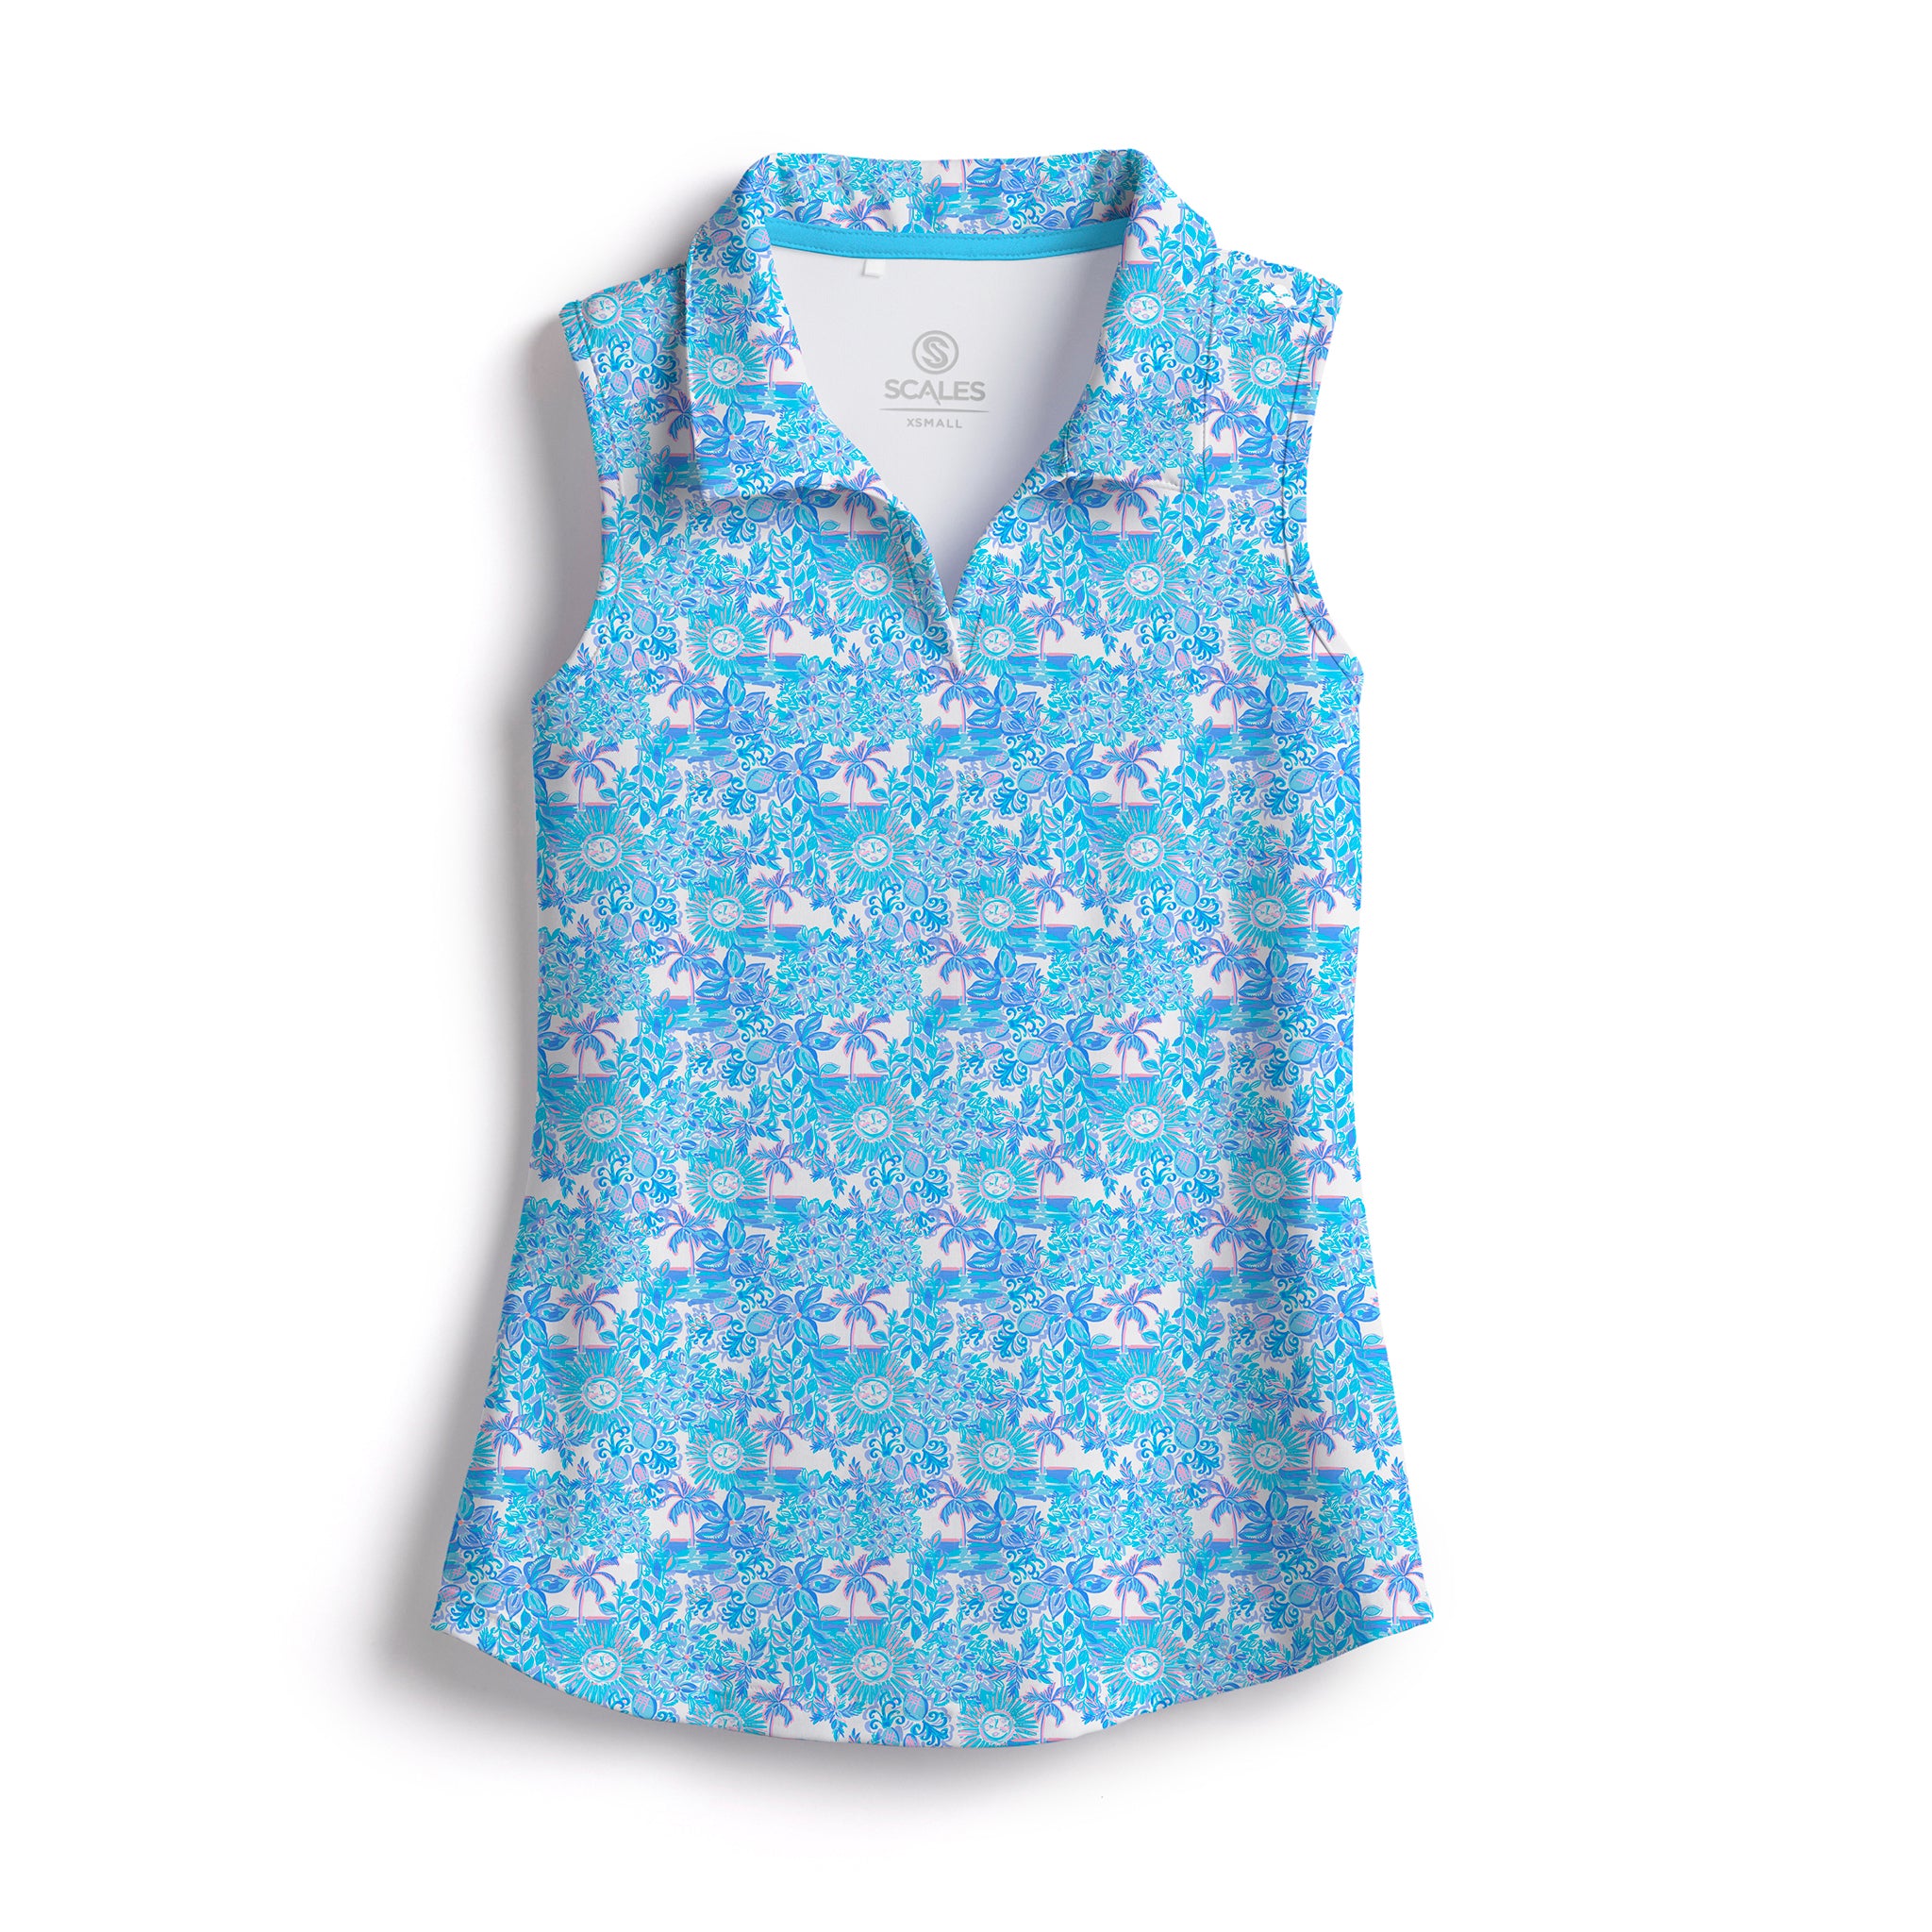 Scales Daily Sunshine Sleeveless Polo in White / Powder Blue Size S